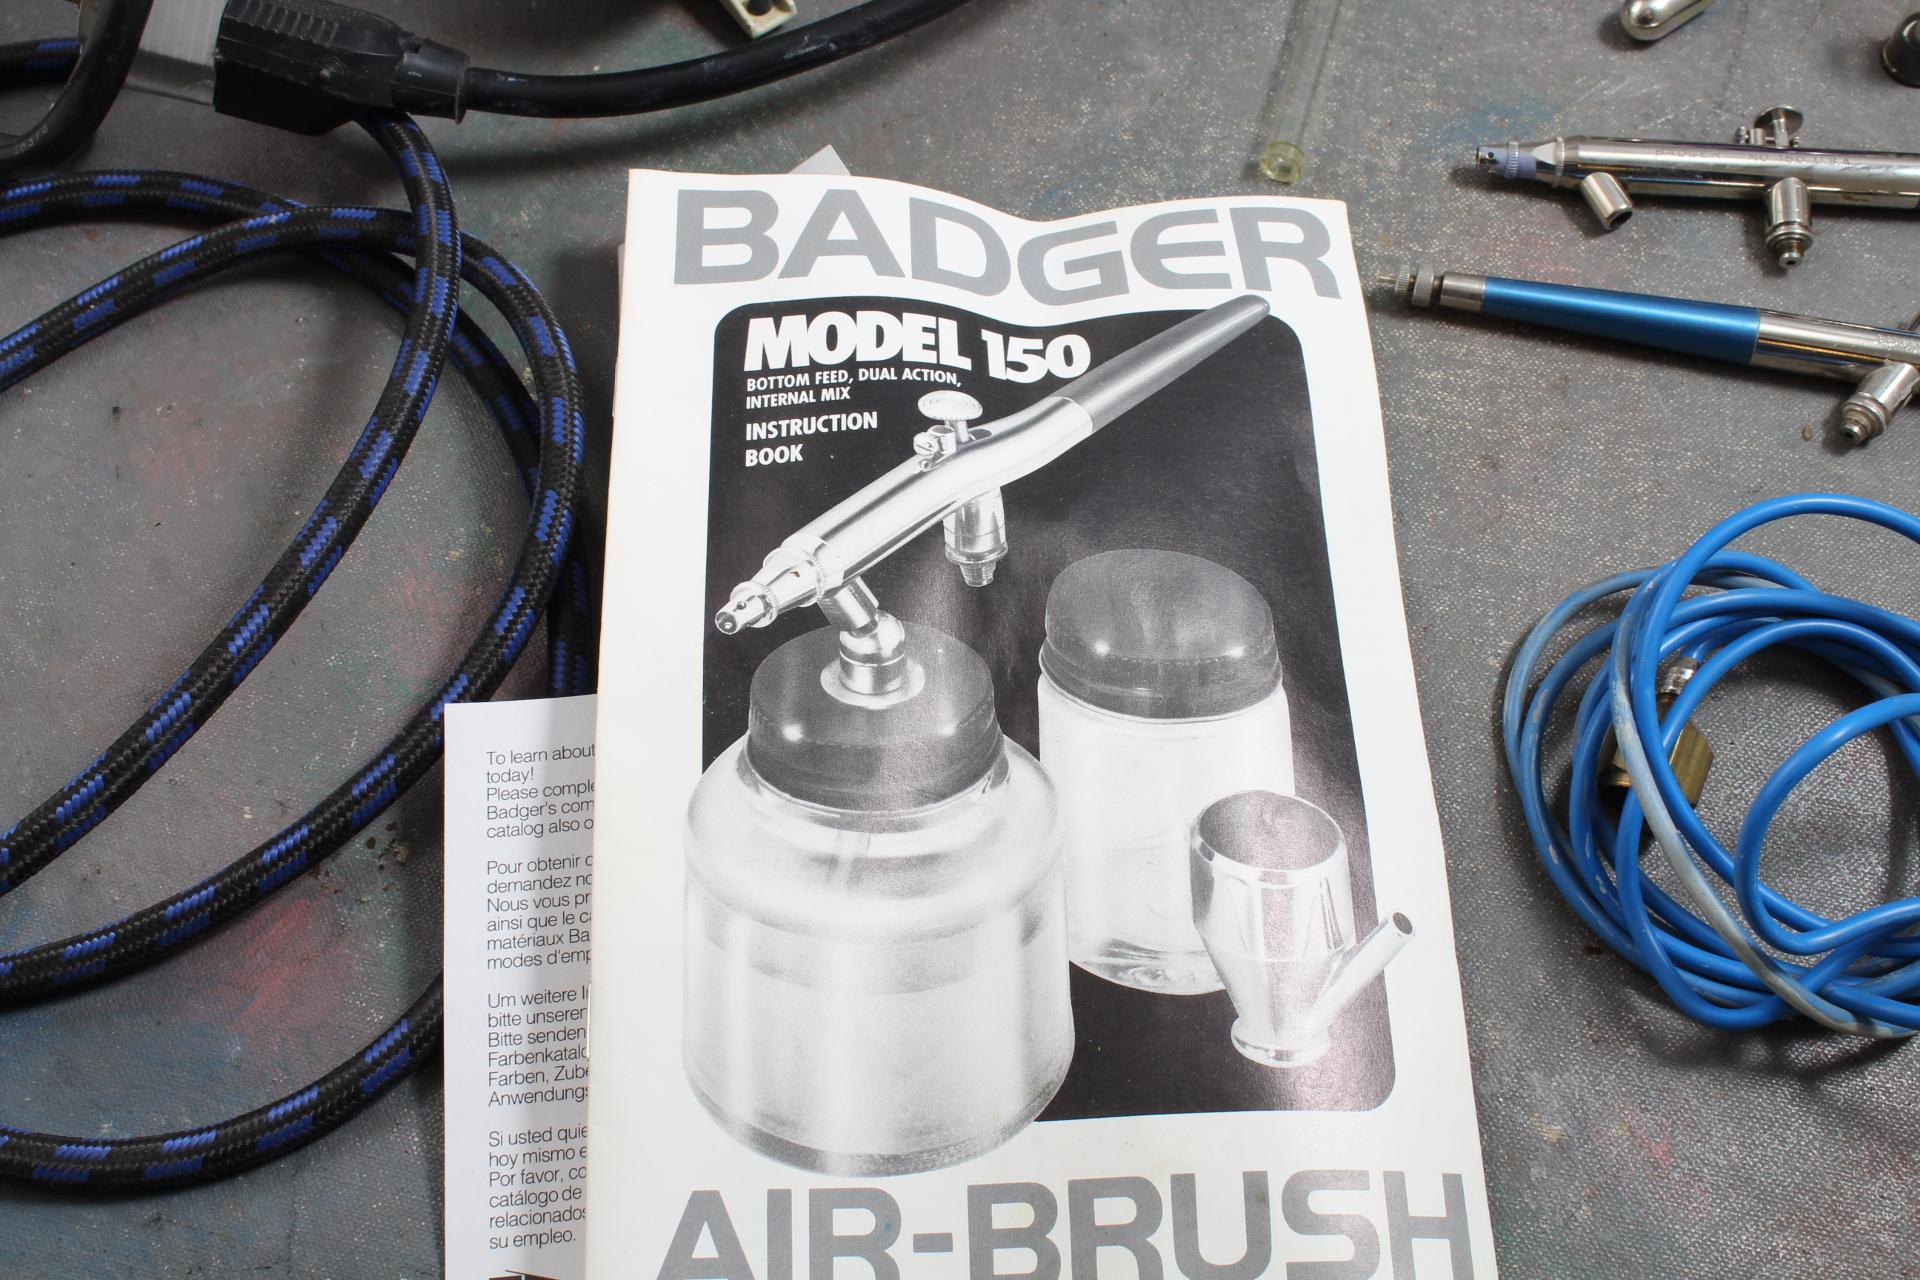 W. R. Brown Co. Air Brush Compressor  #996A with Paints Air Brushes are Badger